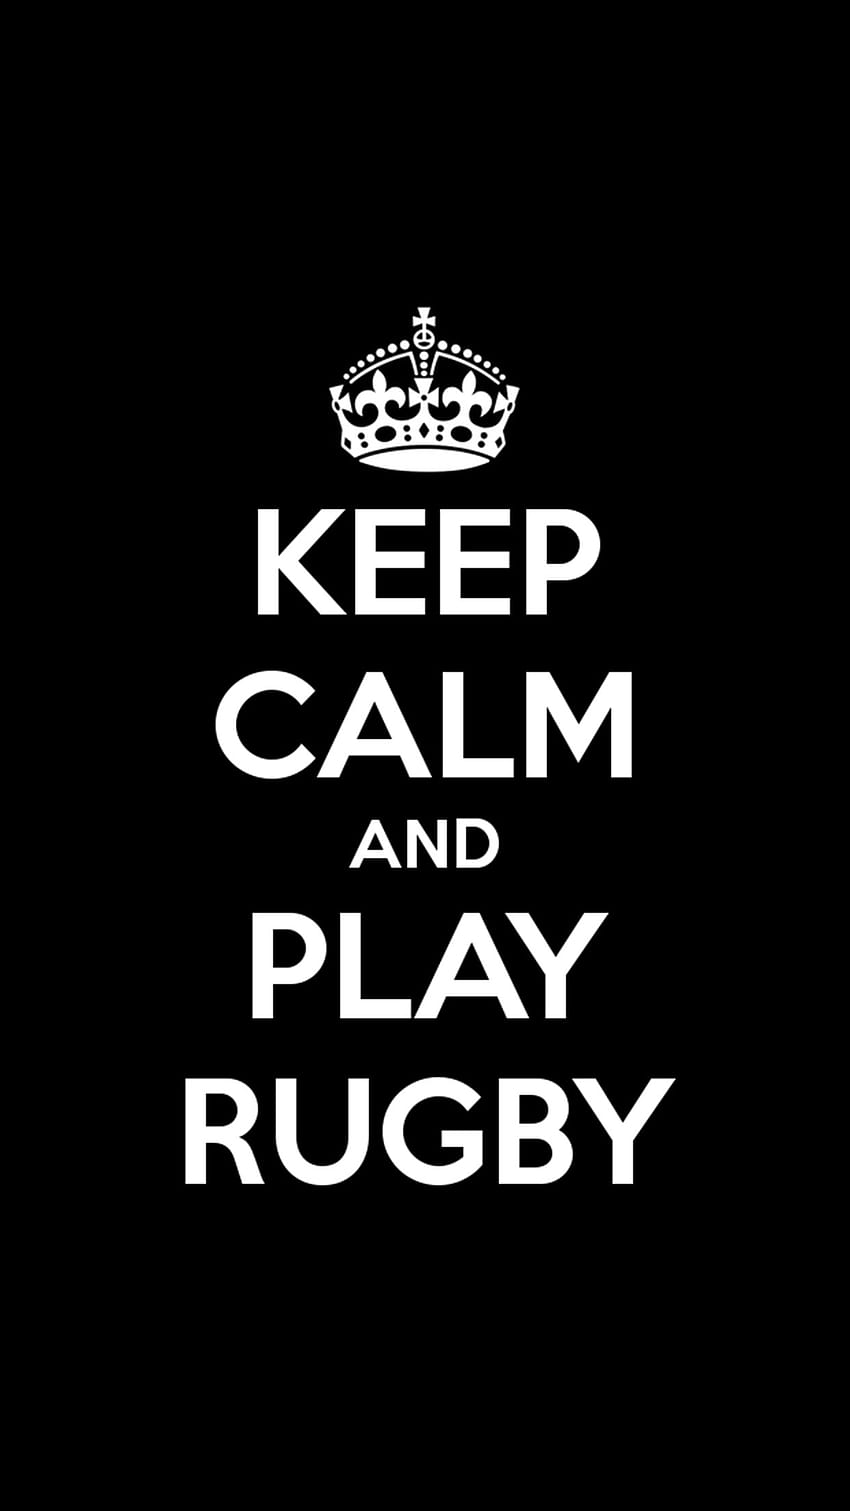 Wallpaper rugby  Rugby Angleterre rugby Fond decran dessin